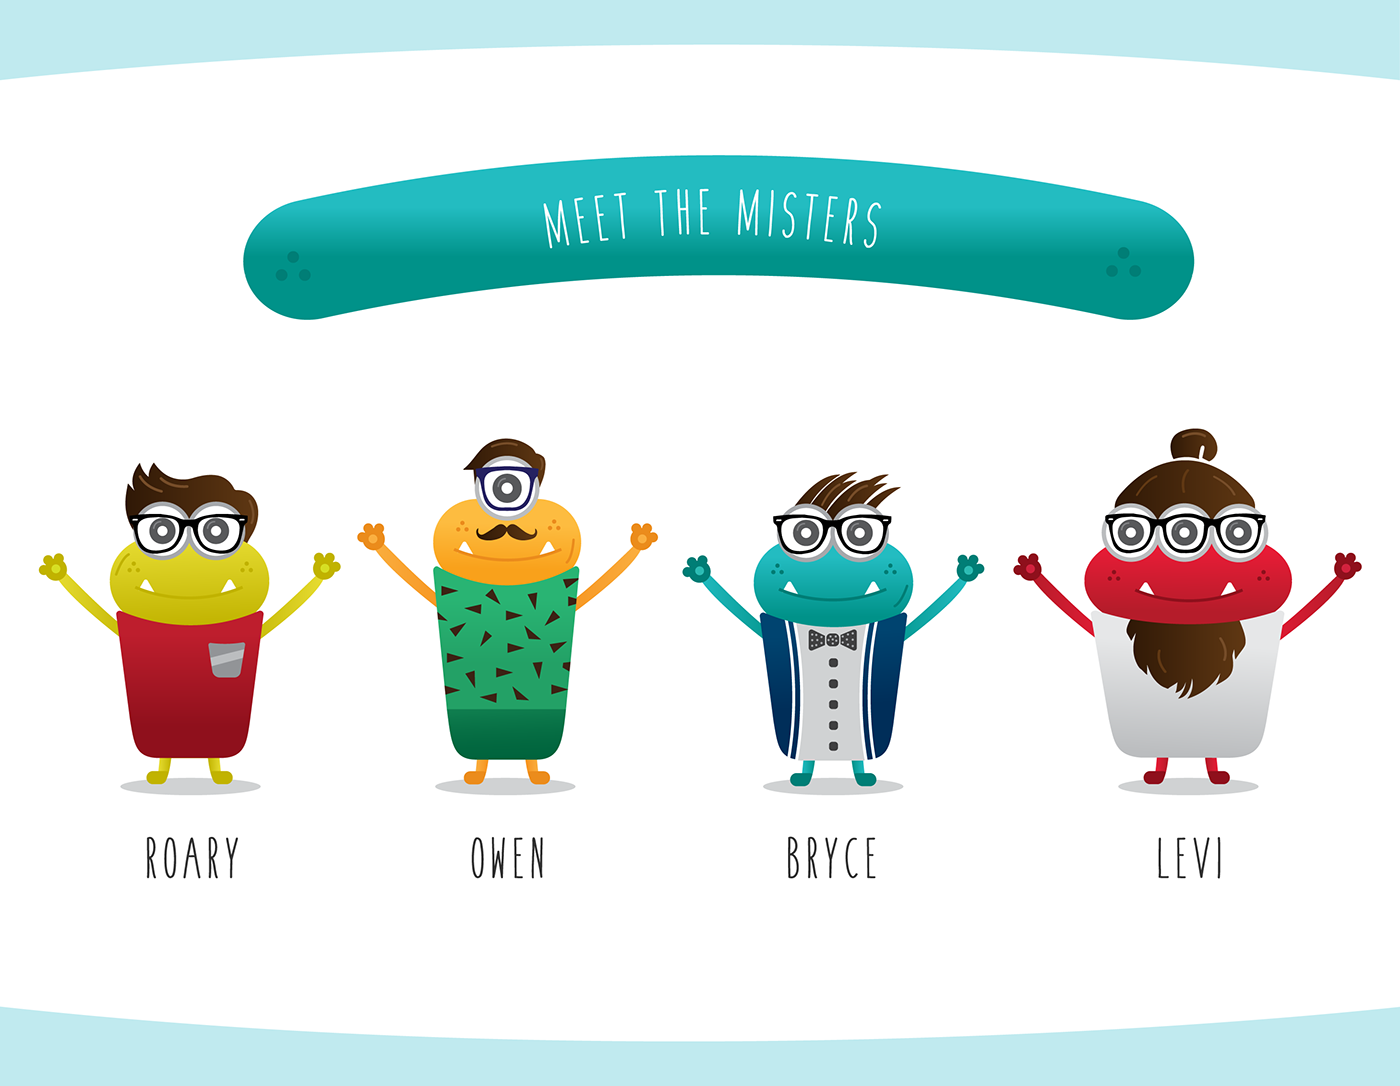 monsters monster Character cartoon Hipster Mister misters beast outfit hair creature monster character monster design cute character monster cartoon